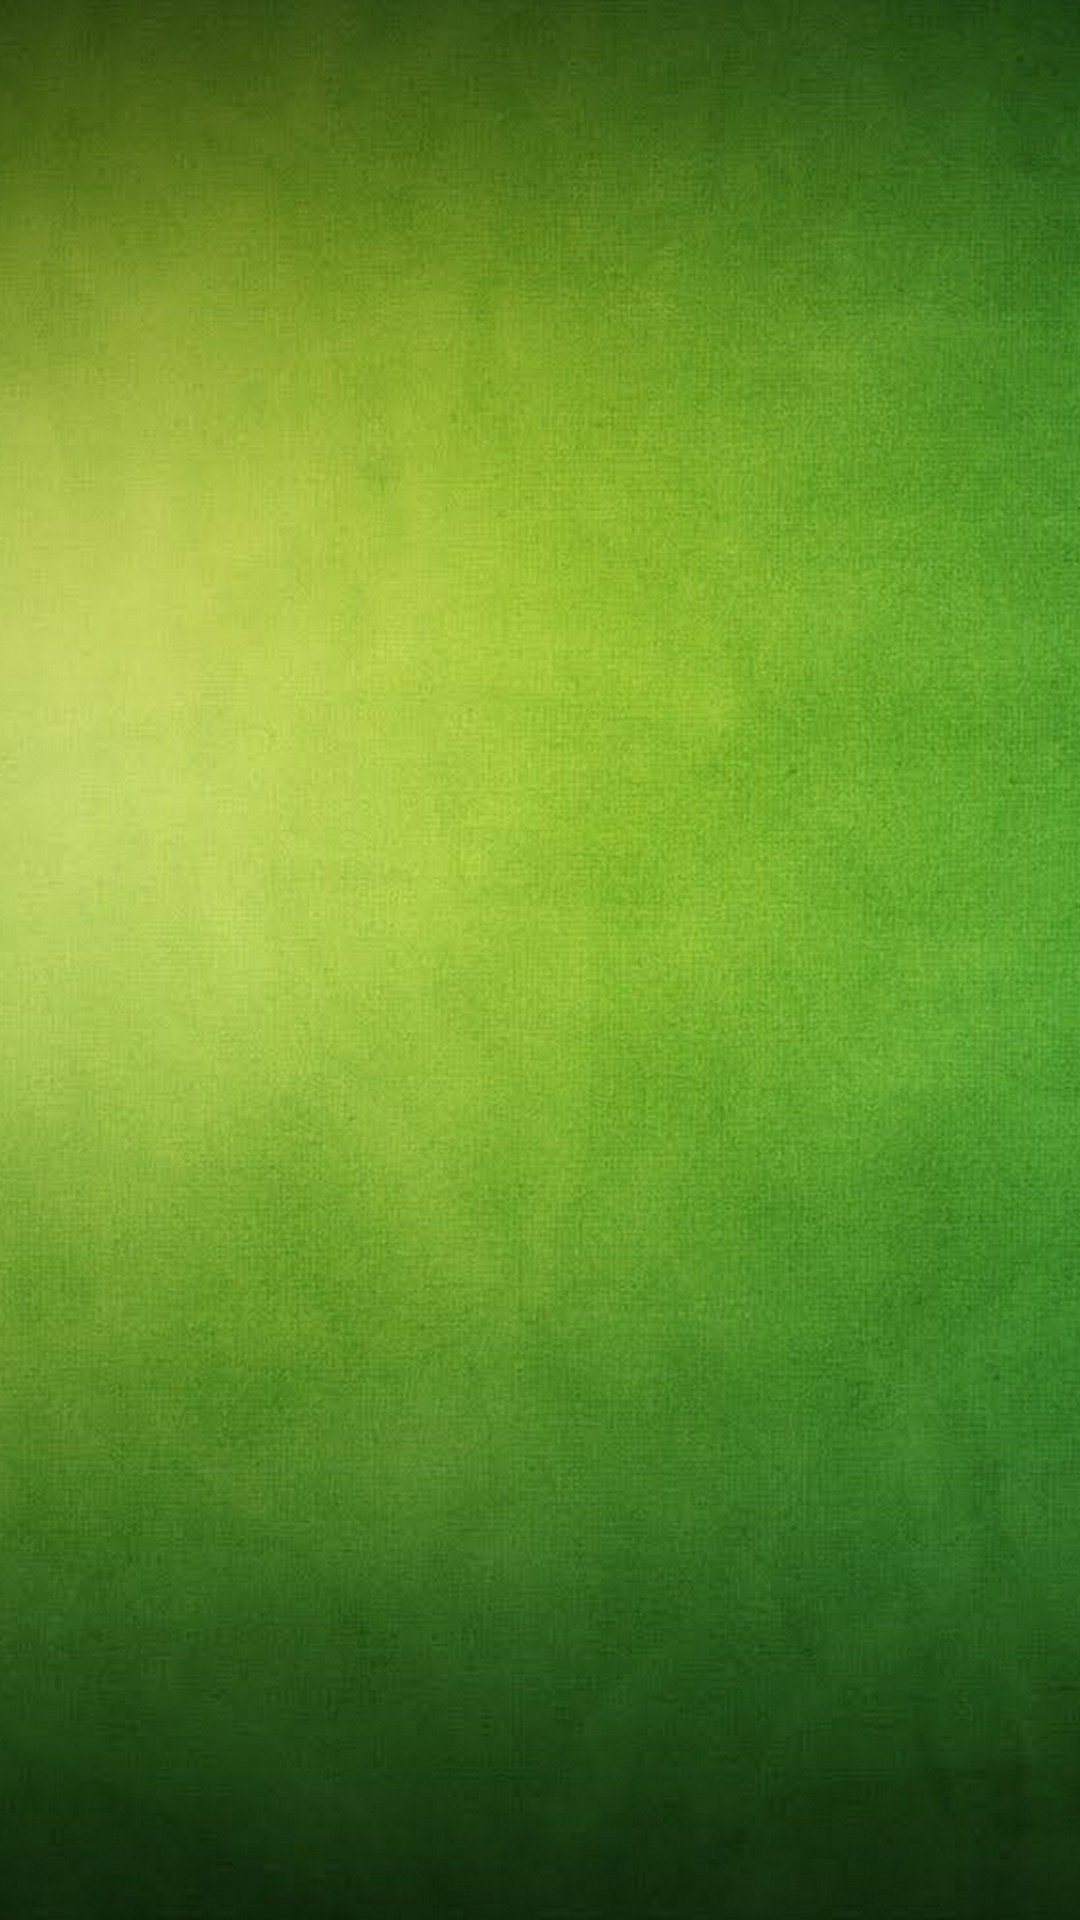 iPhone 7 Wallpaper Lime Green with resolution 1080X1920 pixel. You can make this wallpaper for your iPhone 5, 6, 7, 8, X backgrounds, Mobile Screensaver, or iPad Lock Screen